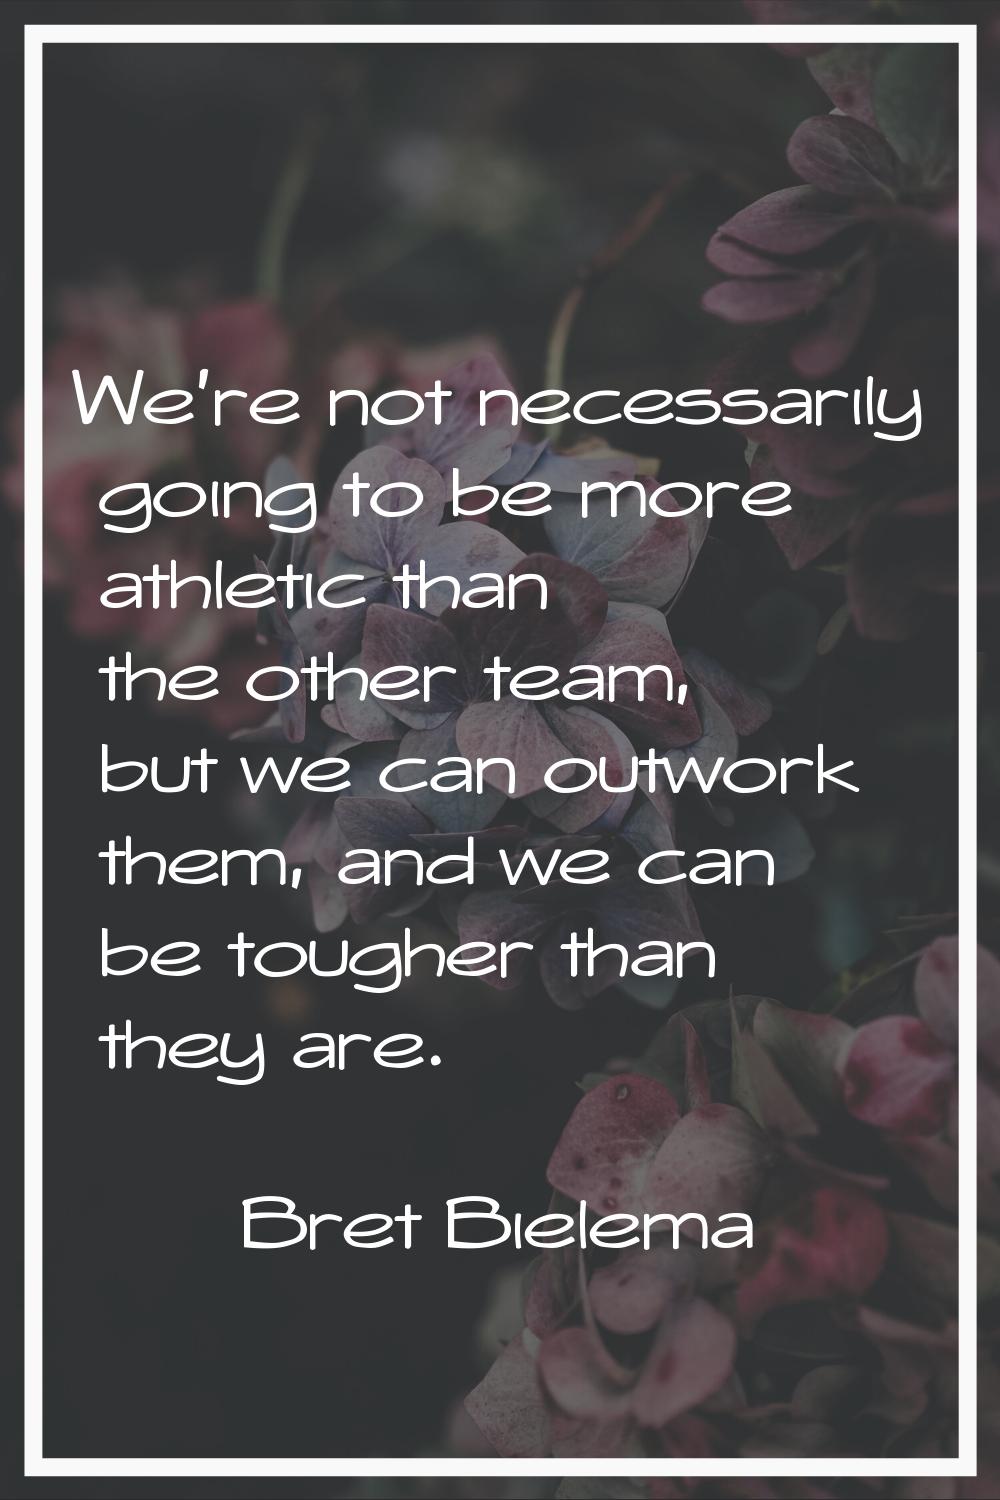 We're not necessarily going to be more athletic than the other team, but we can outwork them, and w